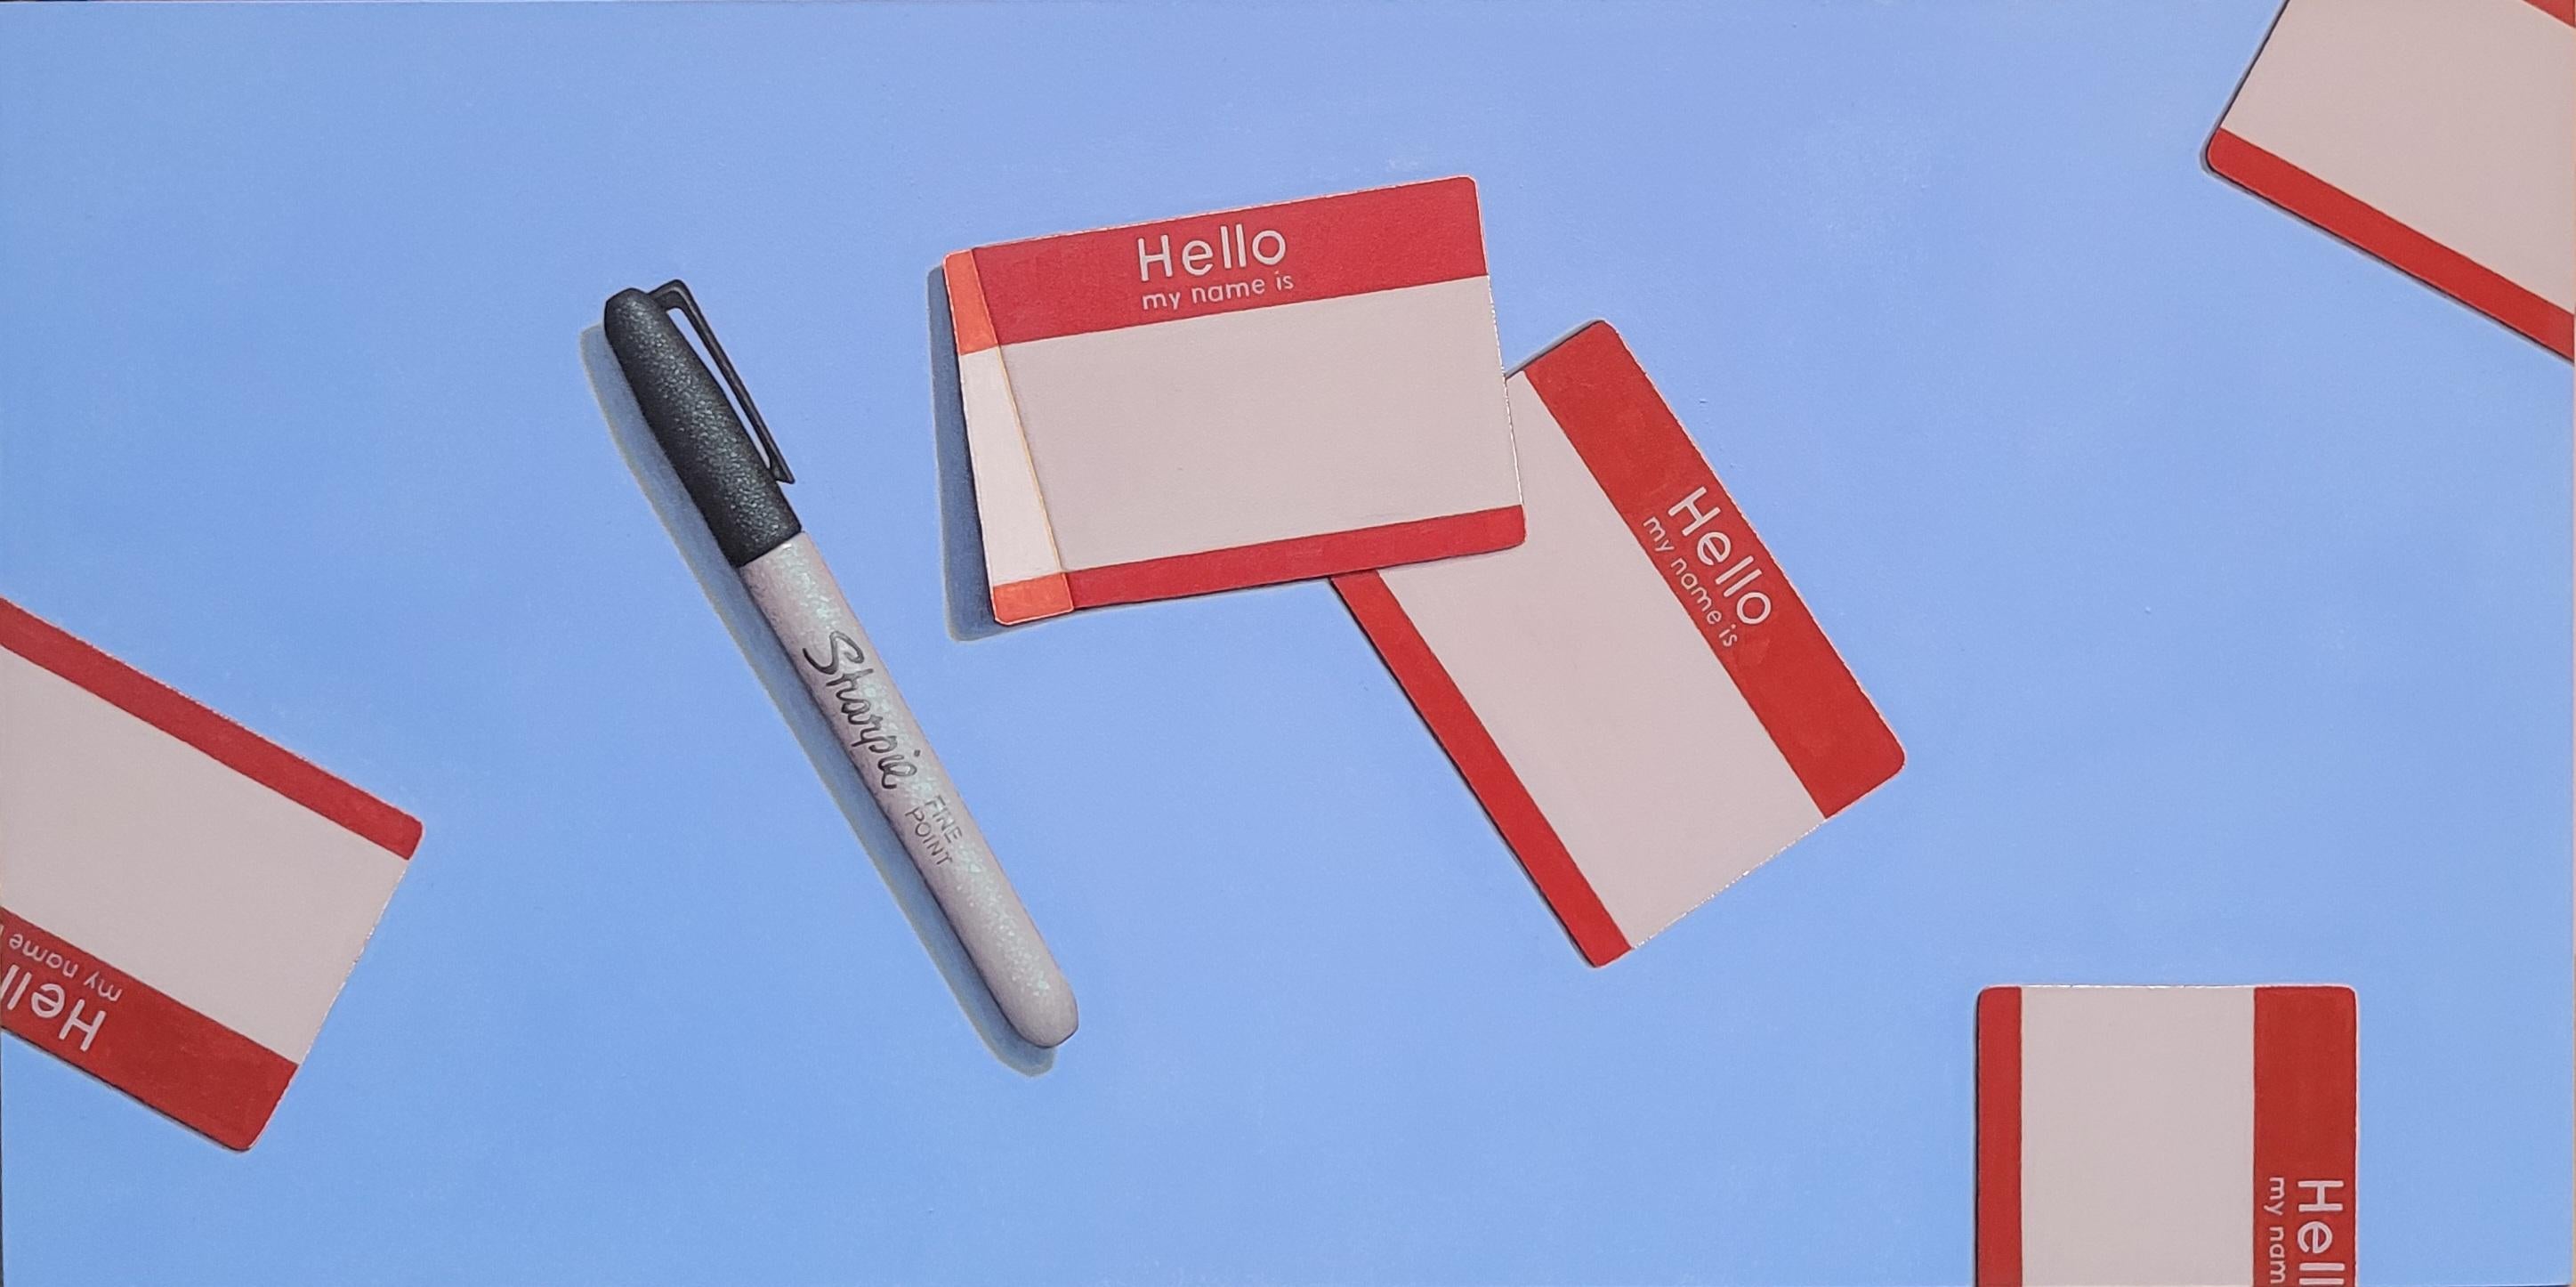 Anthony Mastromatteo Interior Painting - "Hello, My Name Is" trompe l'oeil oil painting of nametags and sharpie on blue